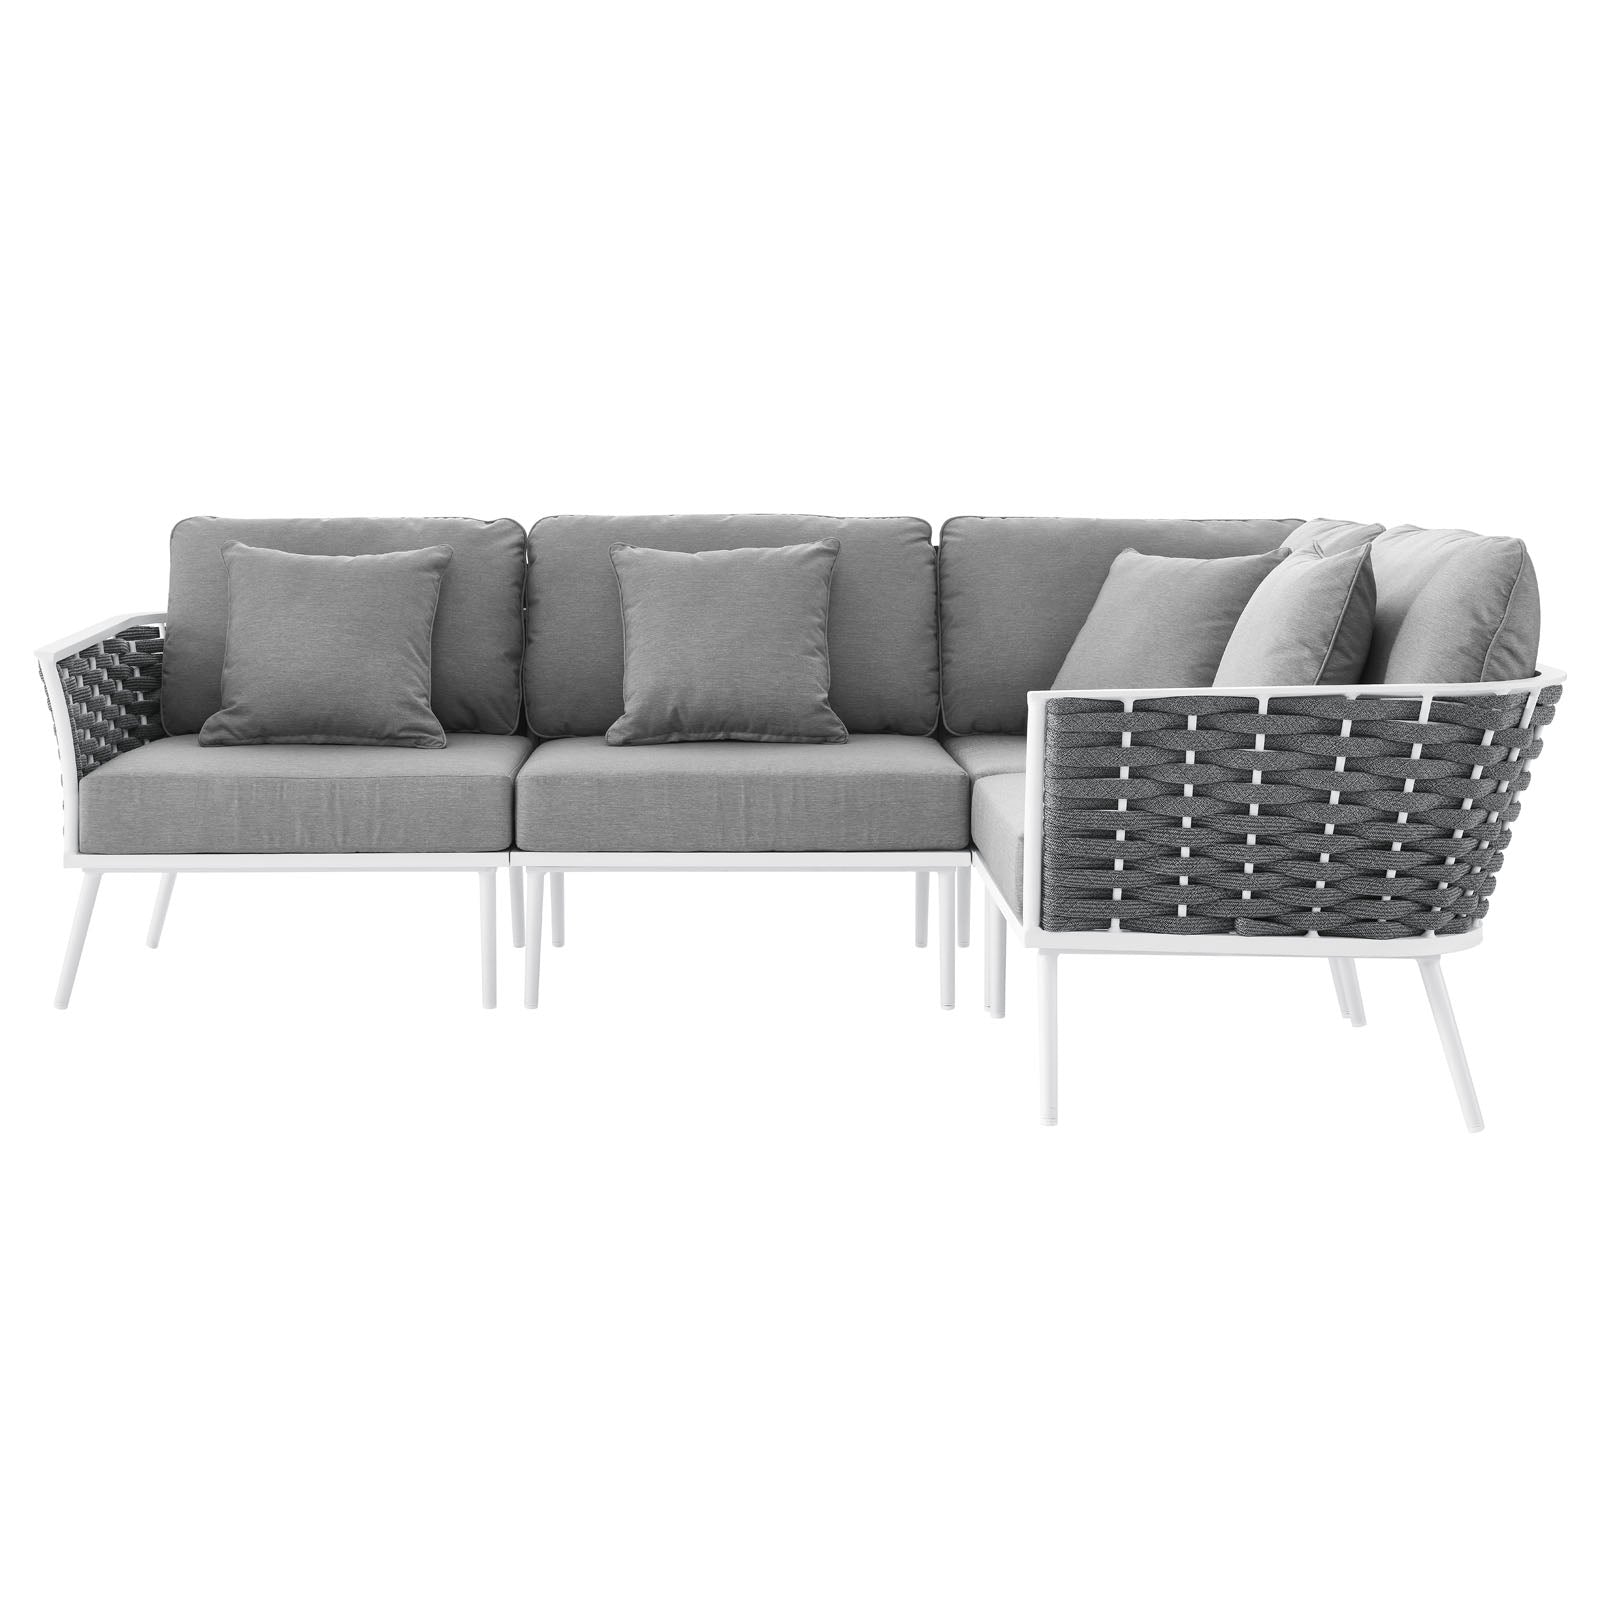 Stance Outdoor Patio Aluminum Large Sectional Sofa - East Shore Modern Home Furnishings